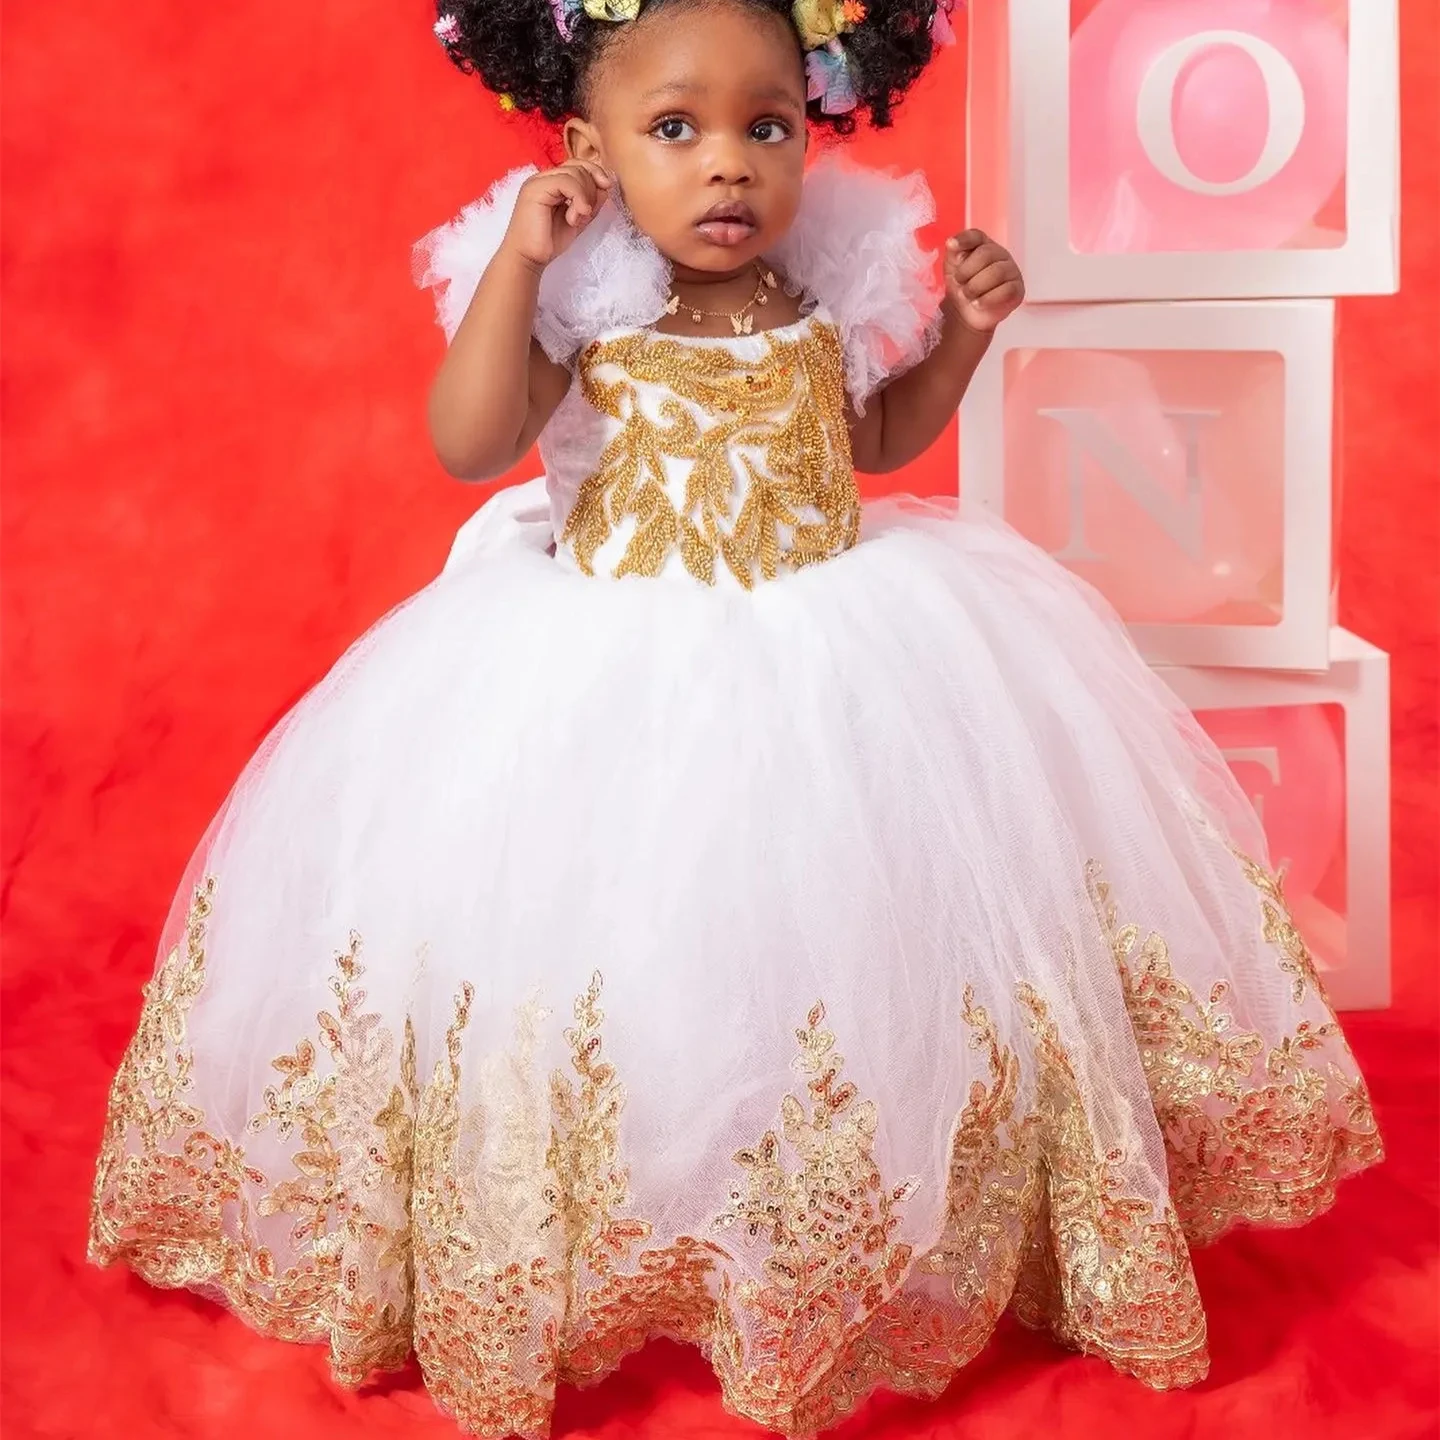 White Princess Flower Girl Dresses For Wedding Gold Appliqued Bow Back Toddler Pageant Gowns Ball Gown Kids Birthday Dress